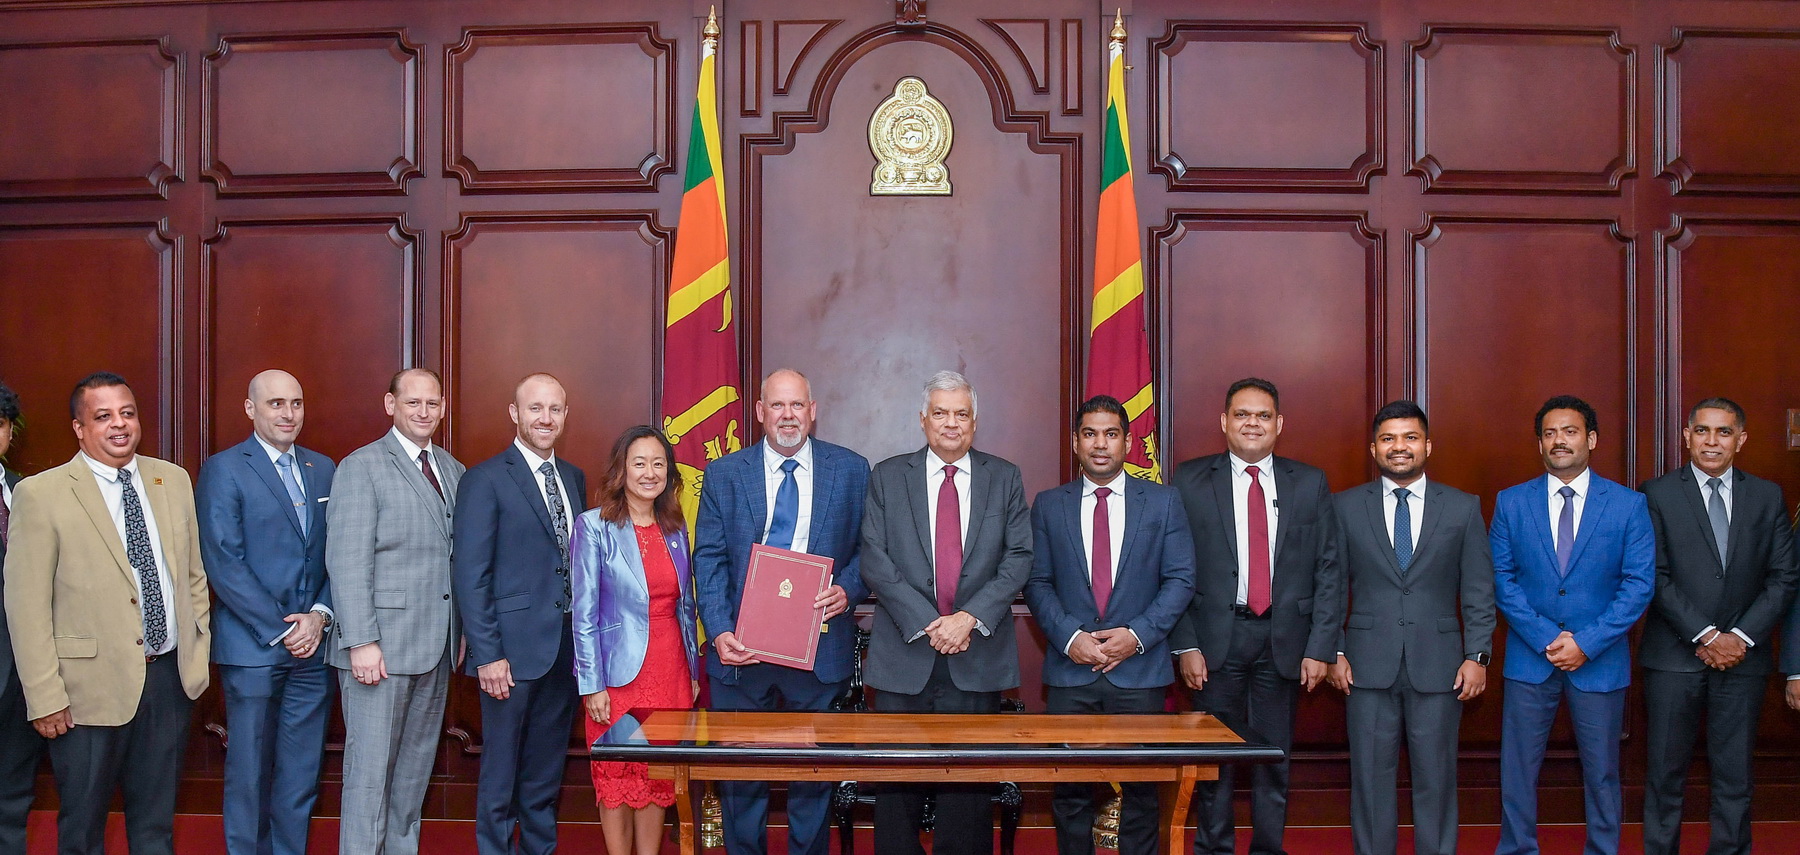 Sri Lanka signs agreement with RM Parks Inc to ensure uninterrupted fuel supply